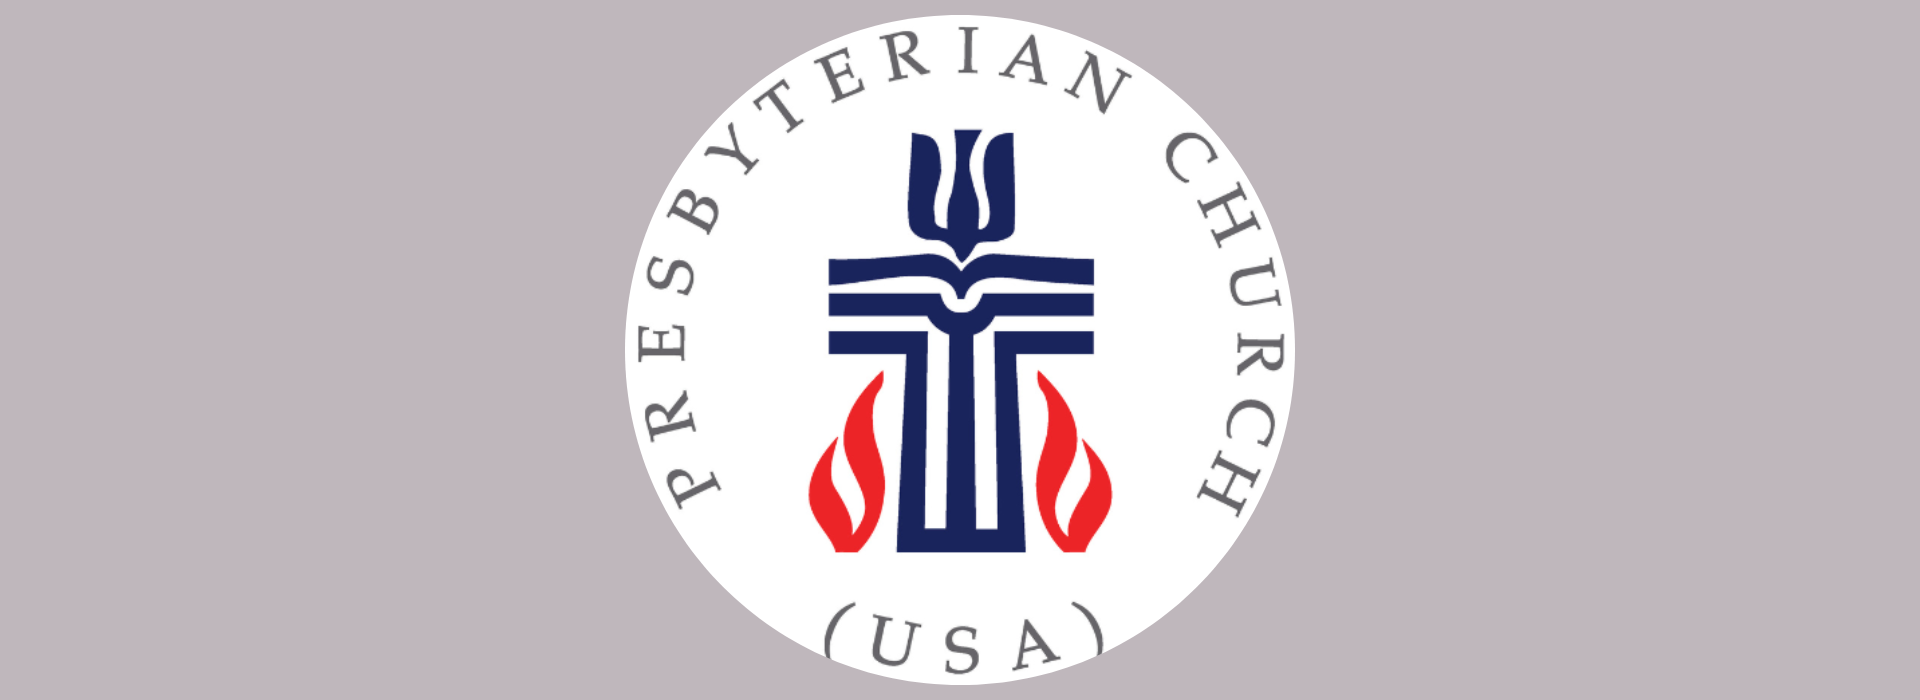 About PCUSA